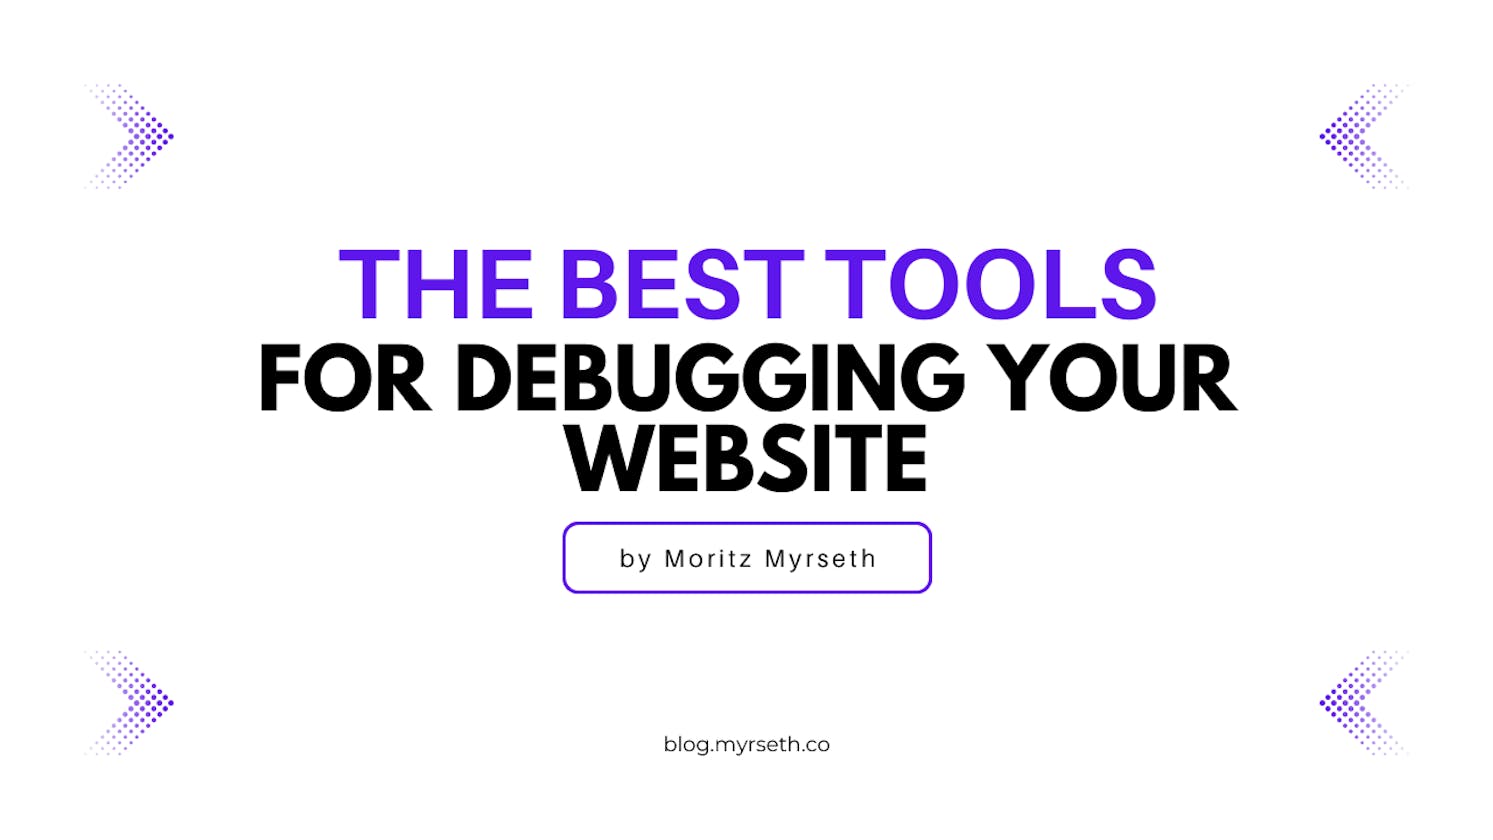 The Best Tools for Debugging Your Website